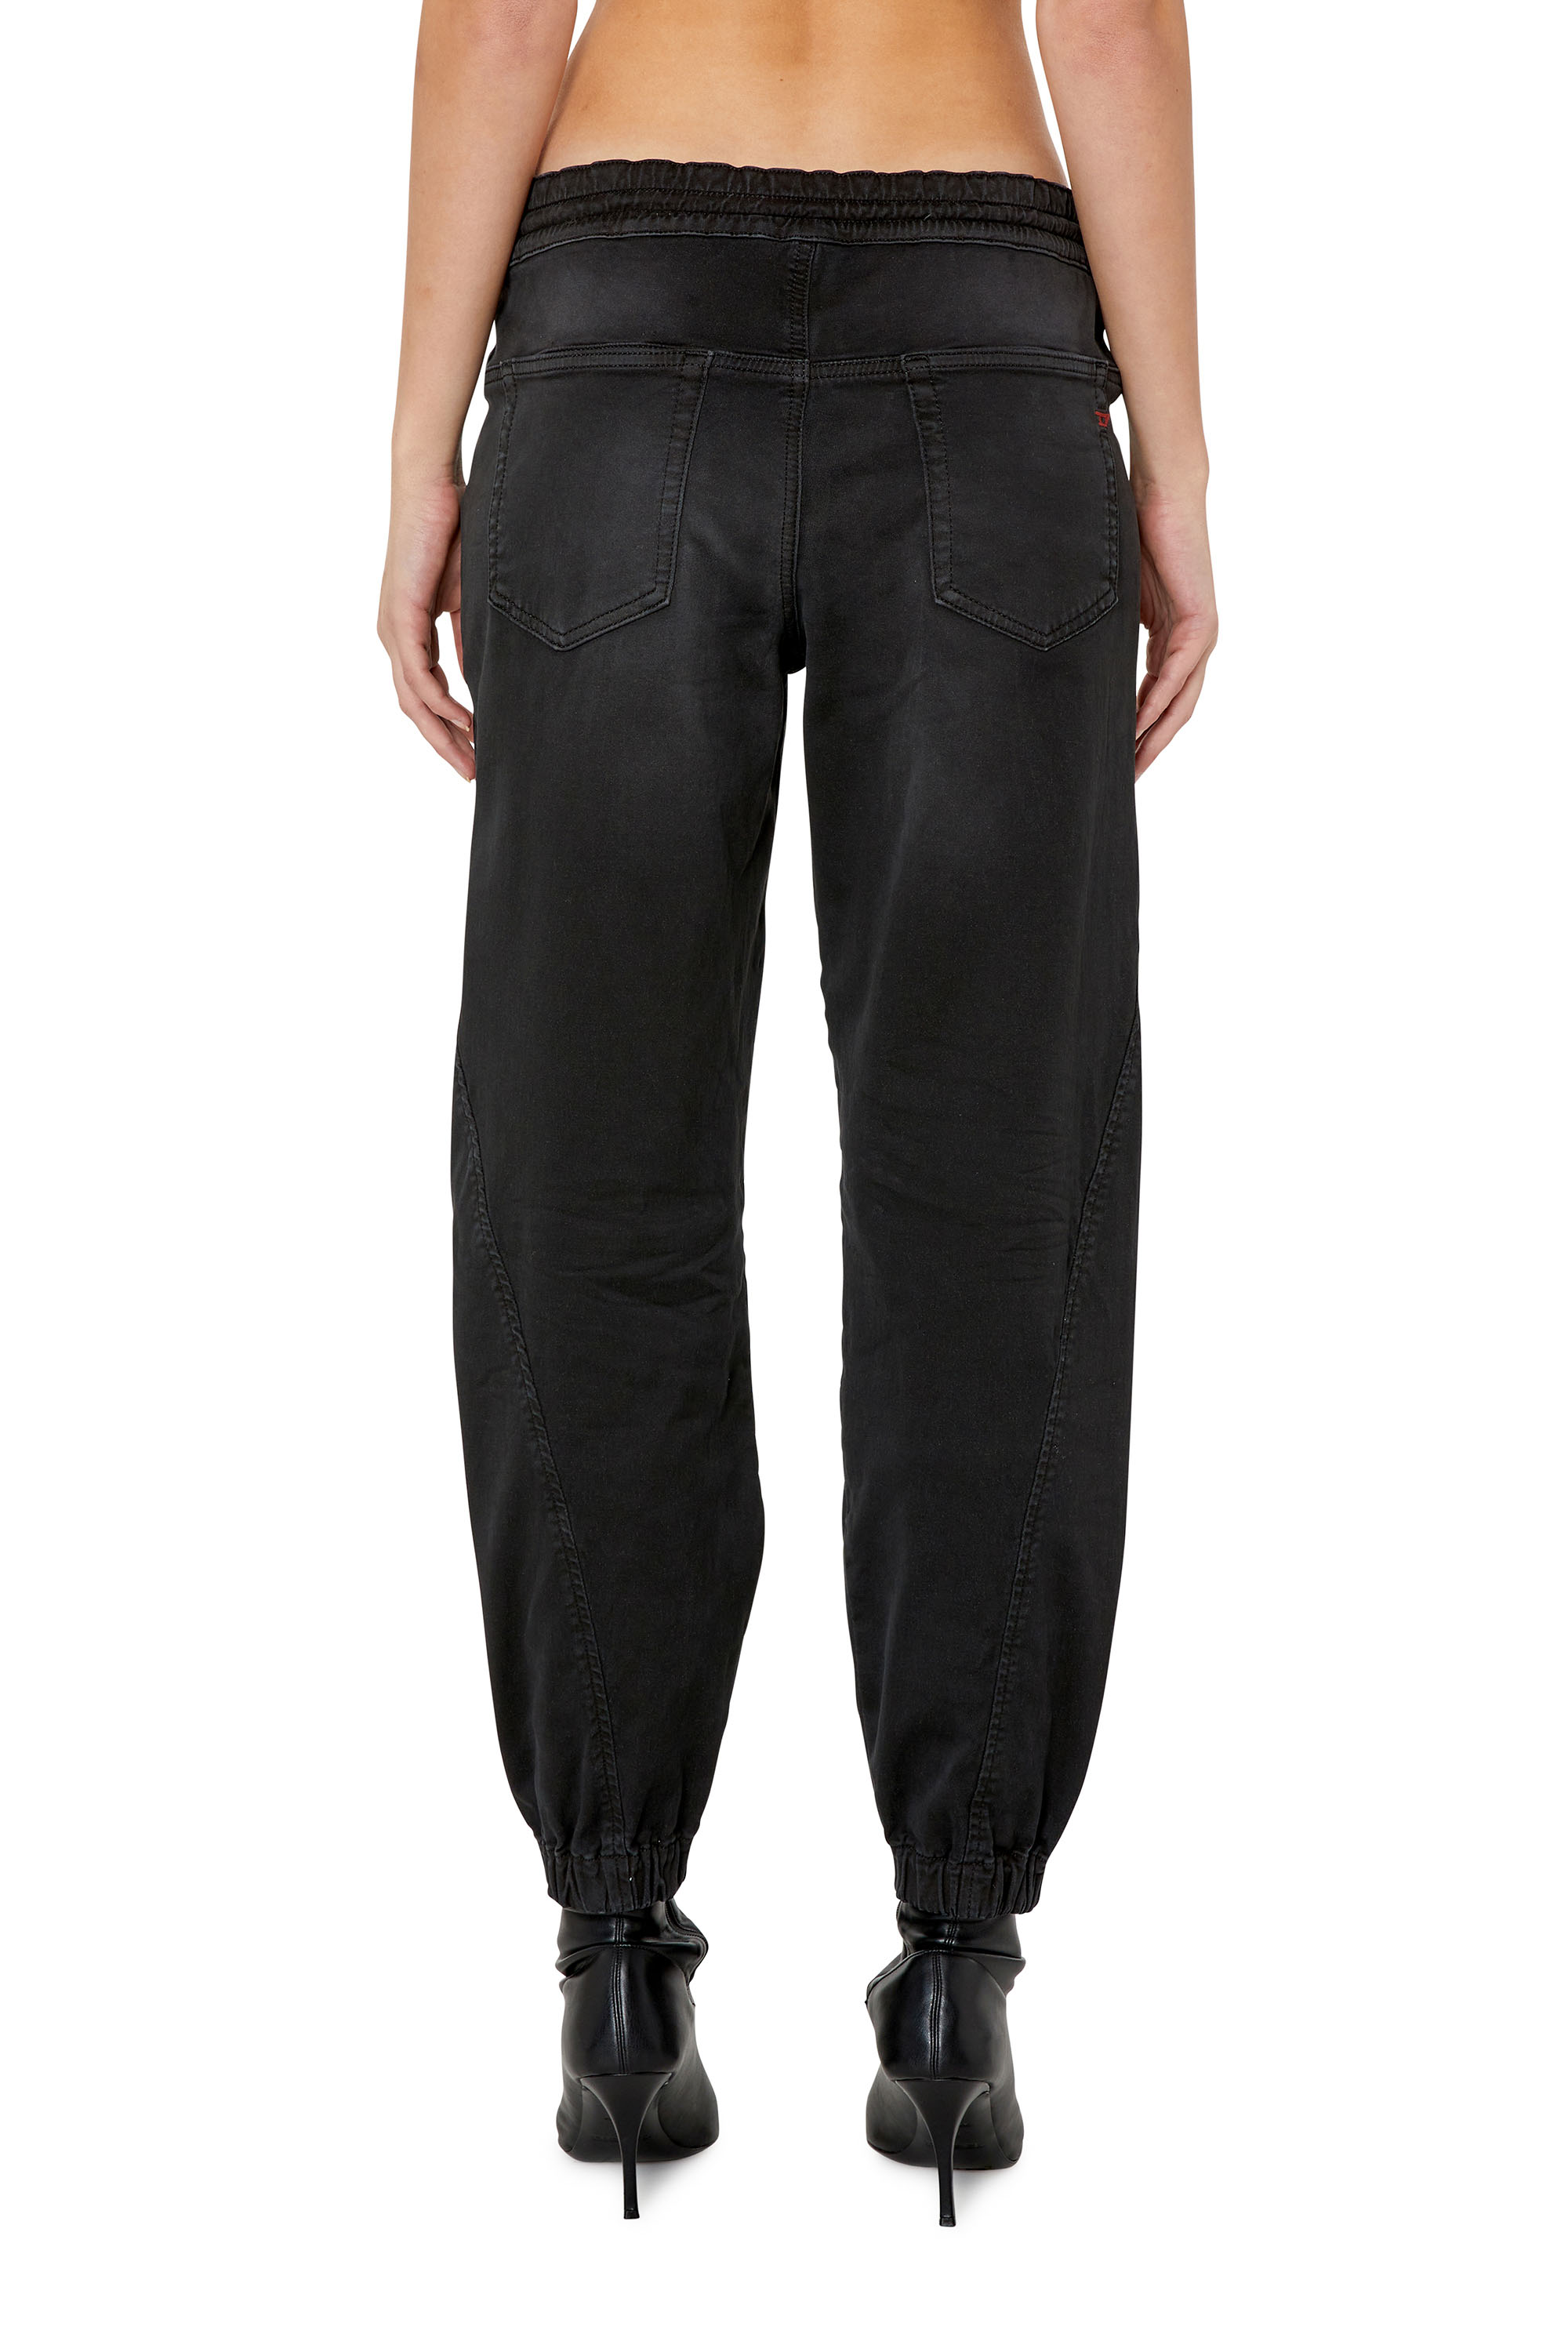 Women's JoggJeans®: High-waisted, baggy, tapered jeans | Diesel®